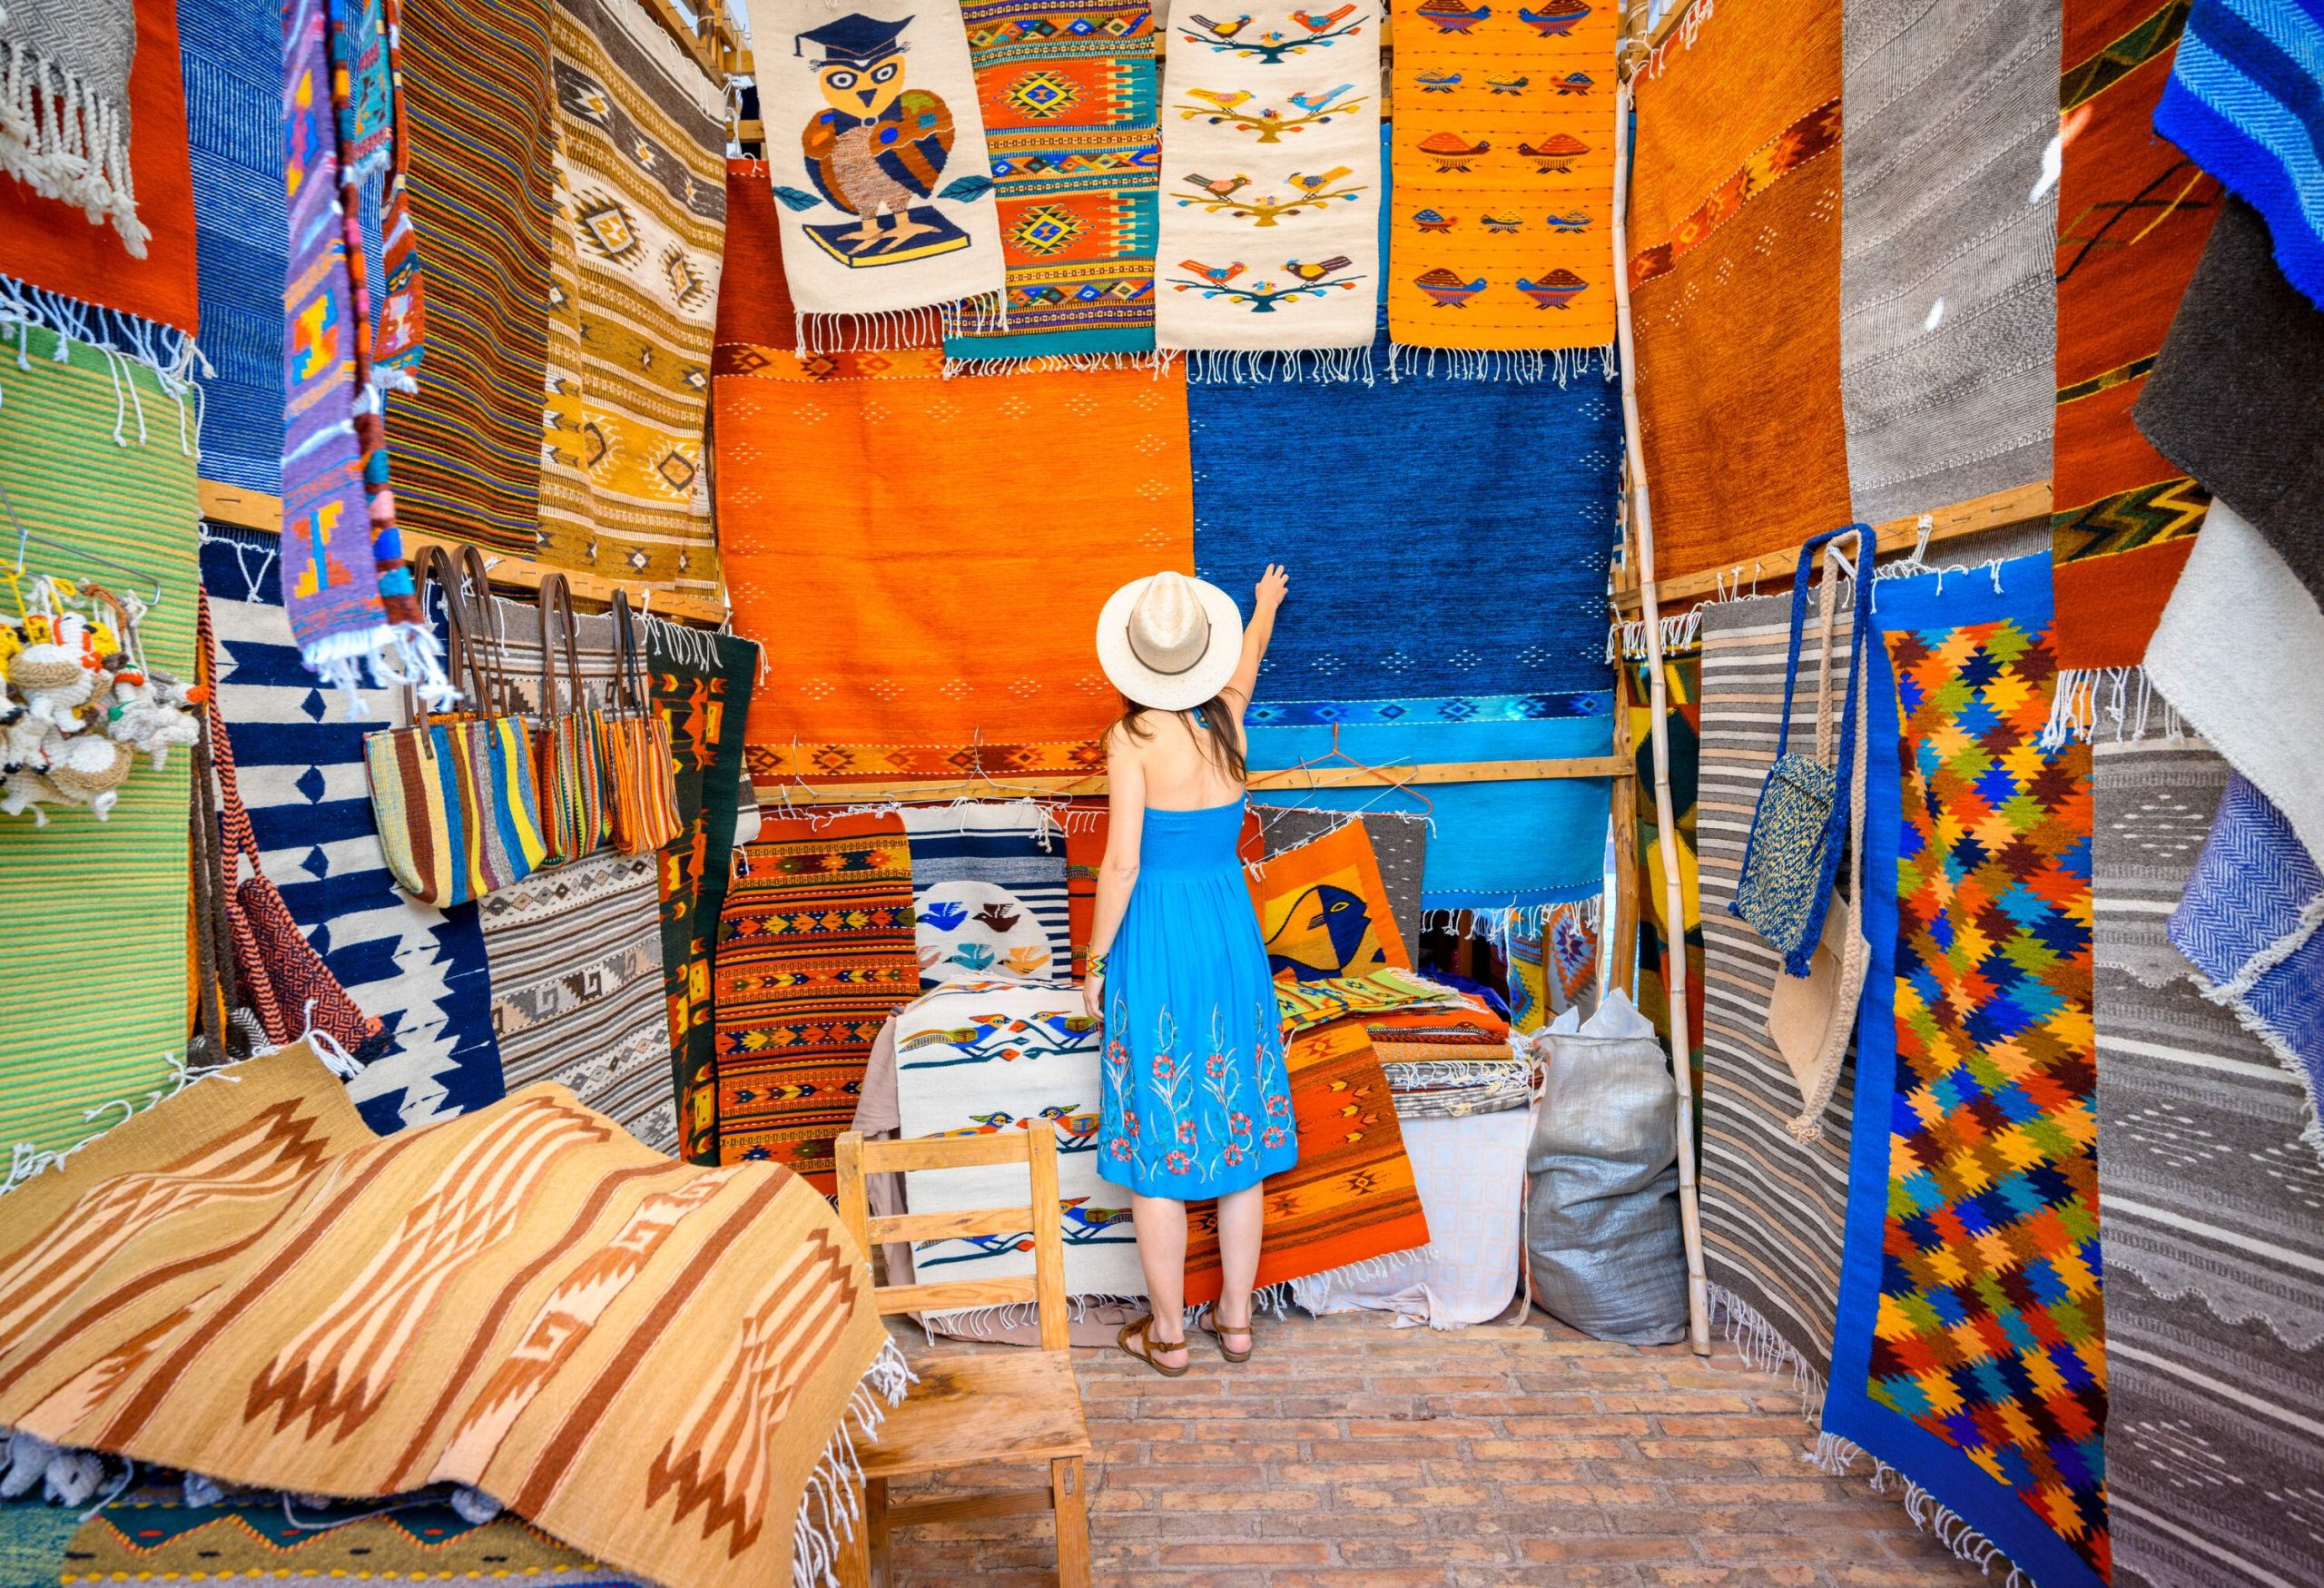 A curious child, dressed in a blue dress and sunhat, gazes in wonder at the array of carpets in a store, eagerly reaching out to touch the one directly in front of them.